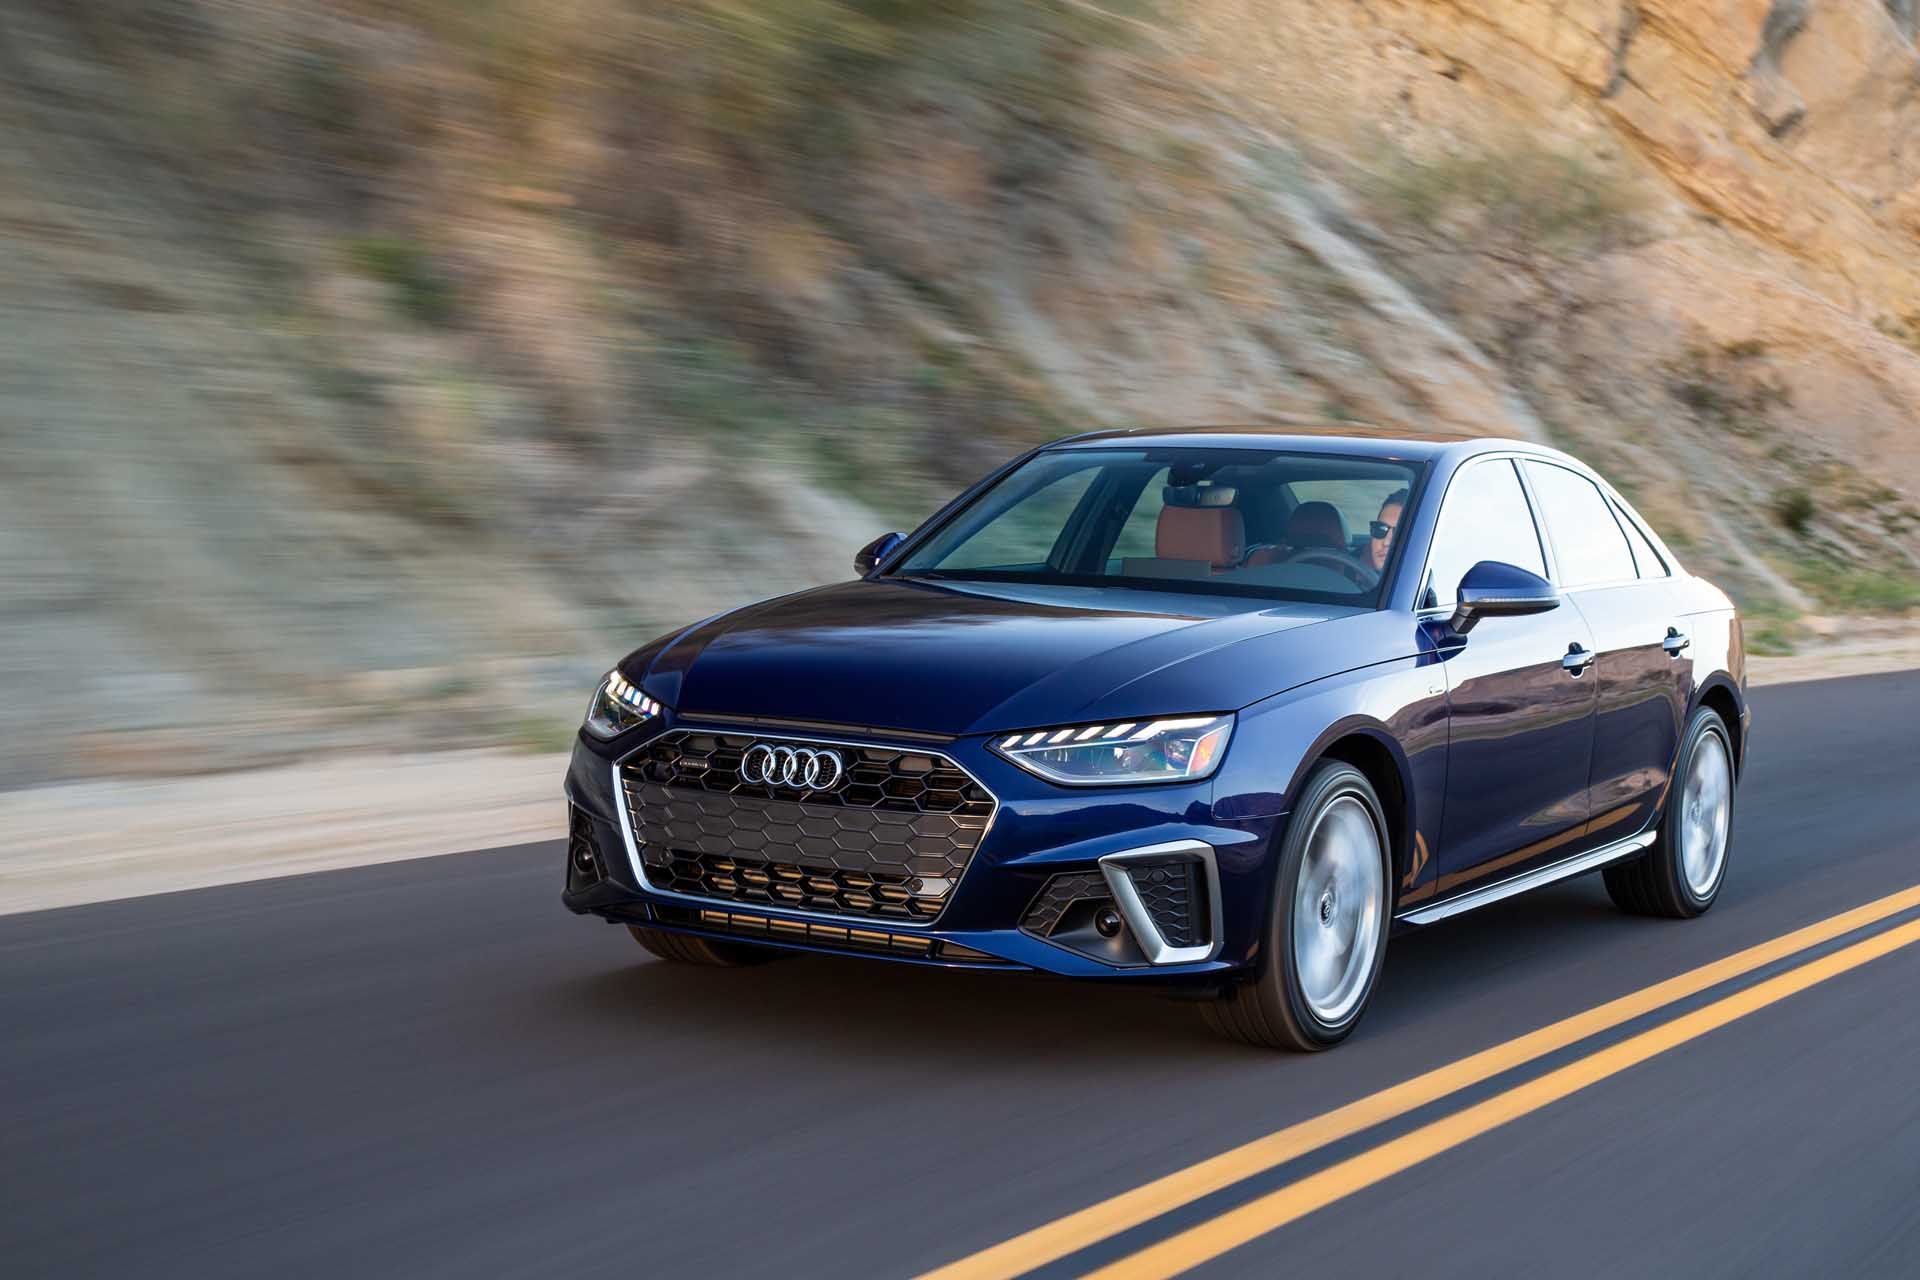 Review: The Audi A4 2021, bettering what's already brilliant